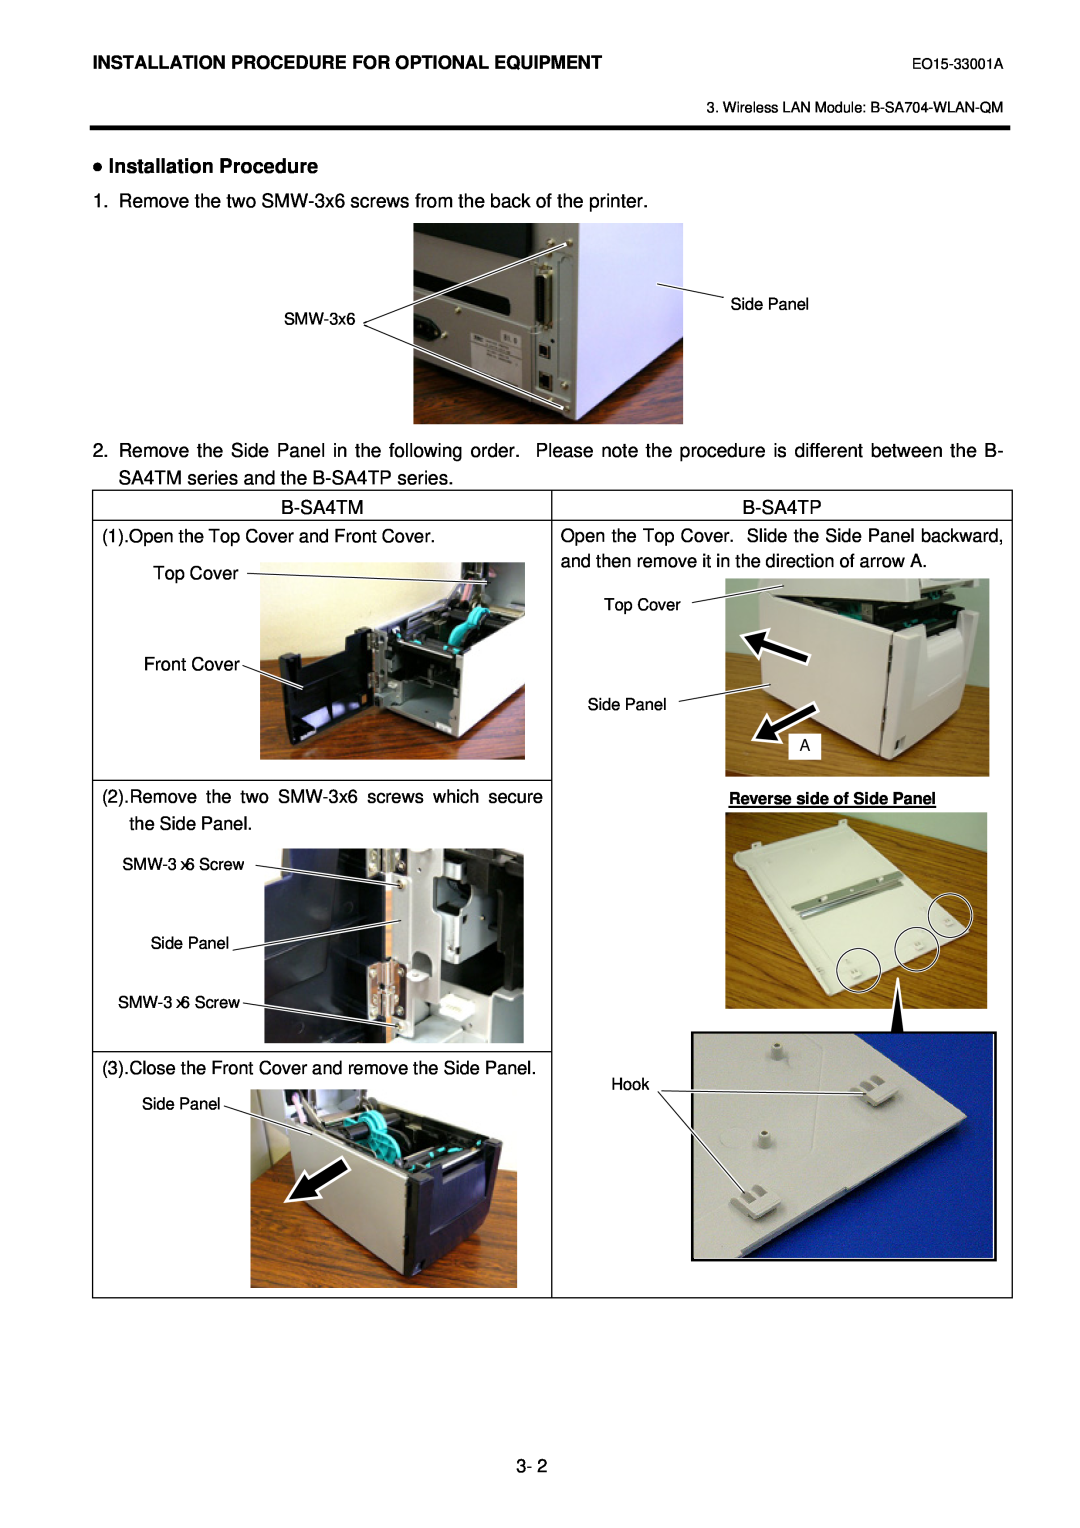 Toshiba B-SA4T installation manual Installation Procedure, Remove the two SMW-3x6 screws from the back of the printer 